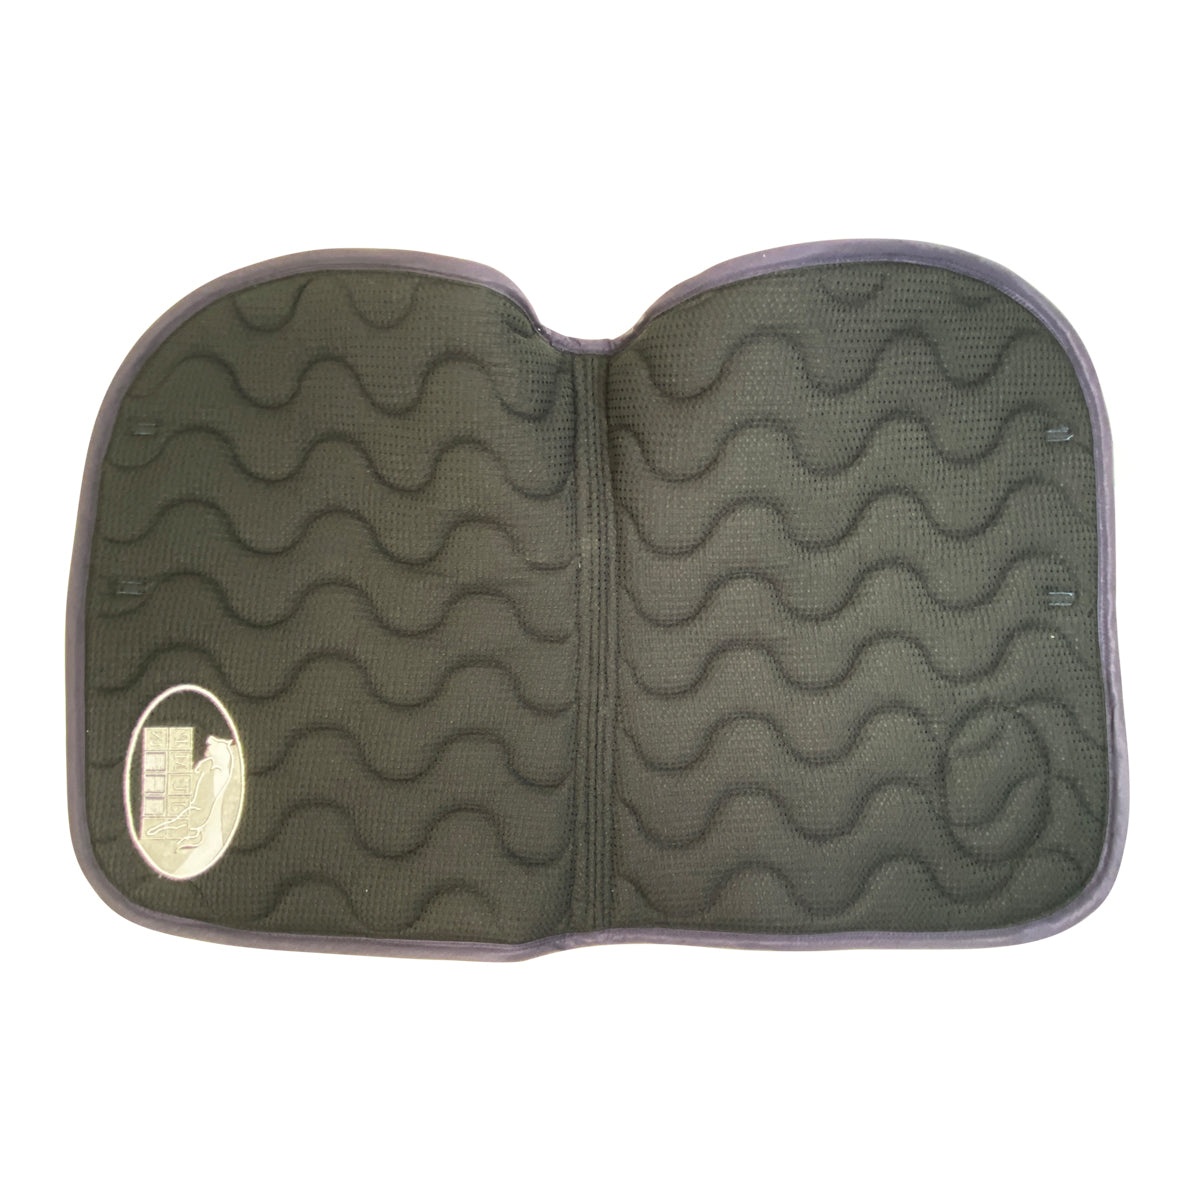 Jump'In 'Écusson' Saddle Pad in Navy